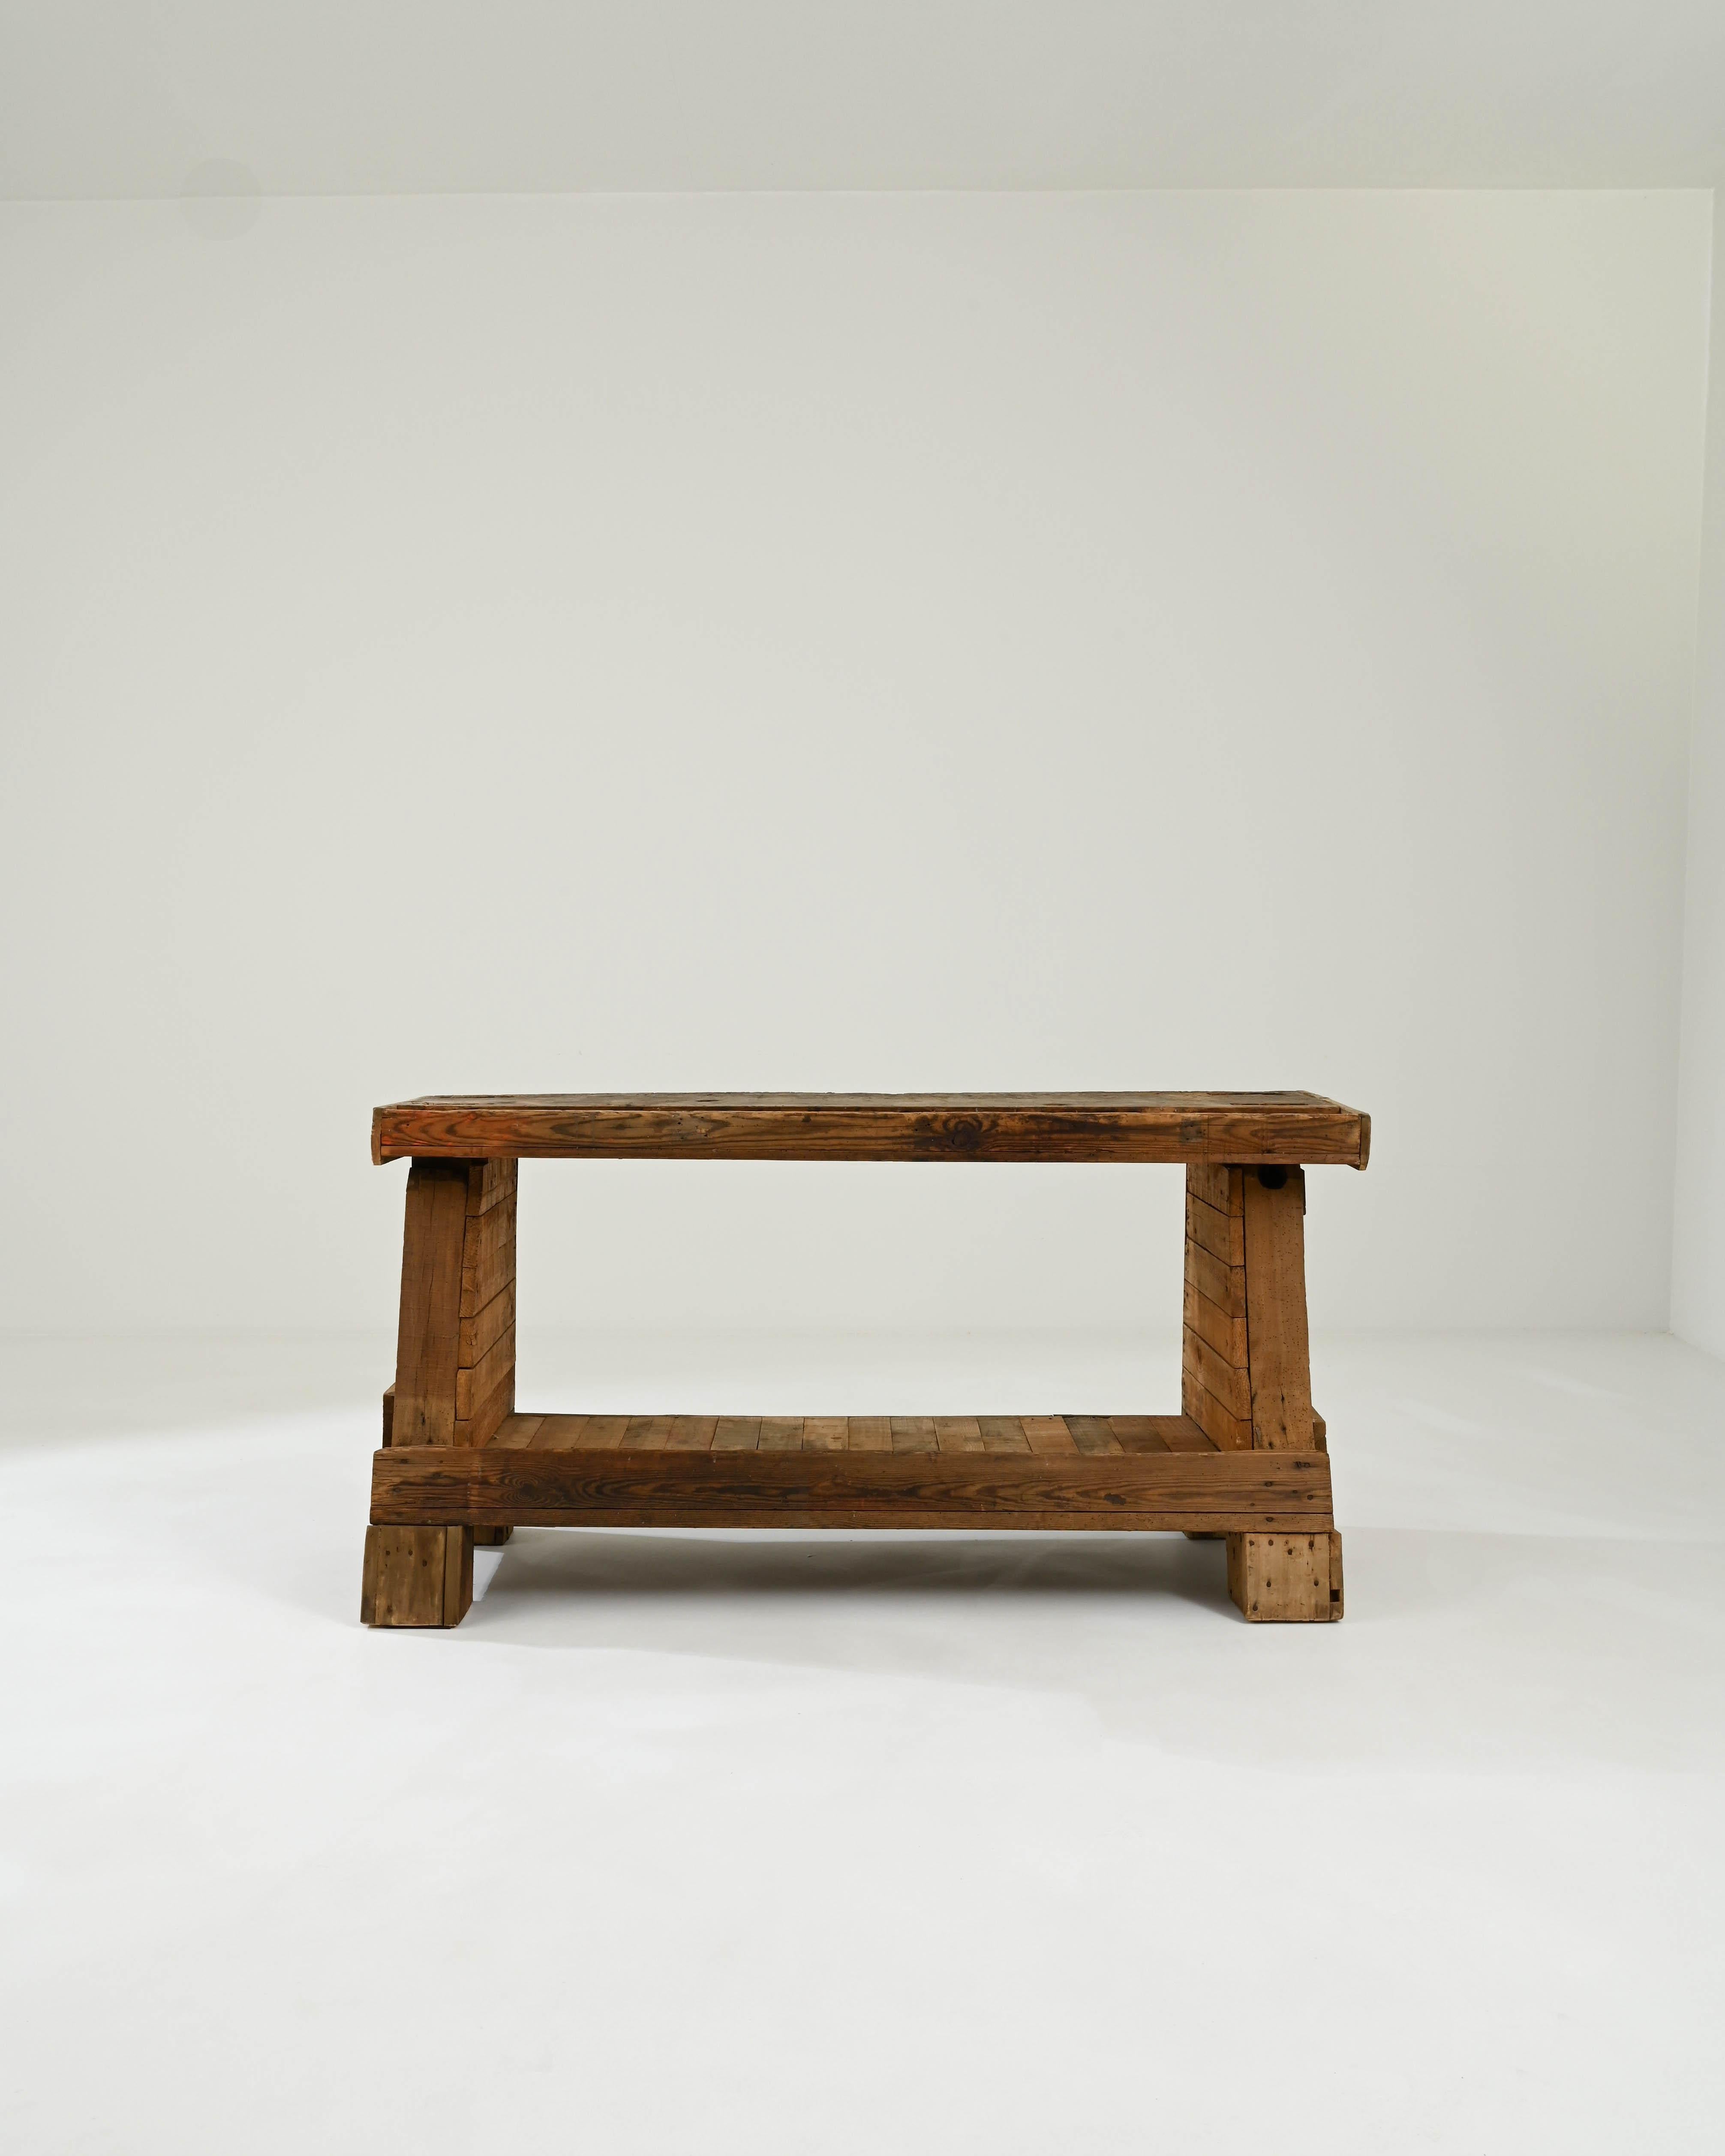 Built in the early 20th century, this charming antique work table stands on sturdy A-shaped legs with large square feet for added support. The long, narrow table top features a deep trough that can be used for storing tools. Beneath, a lower shelf